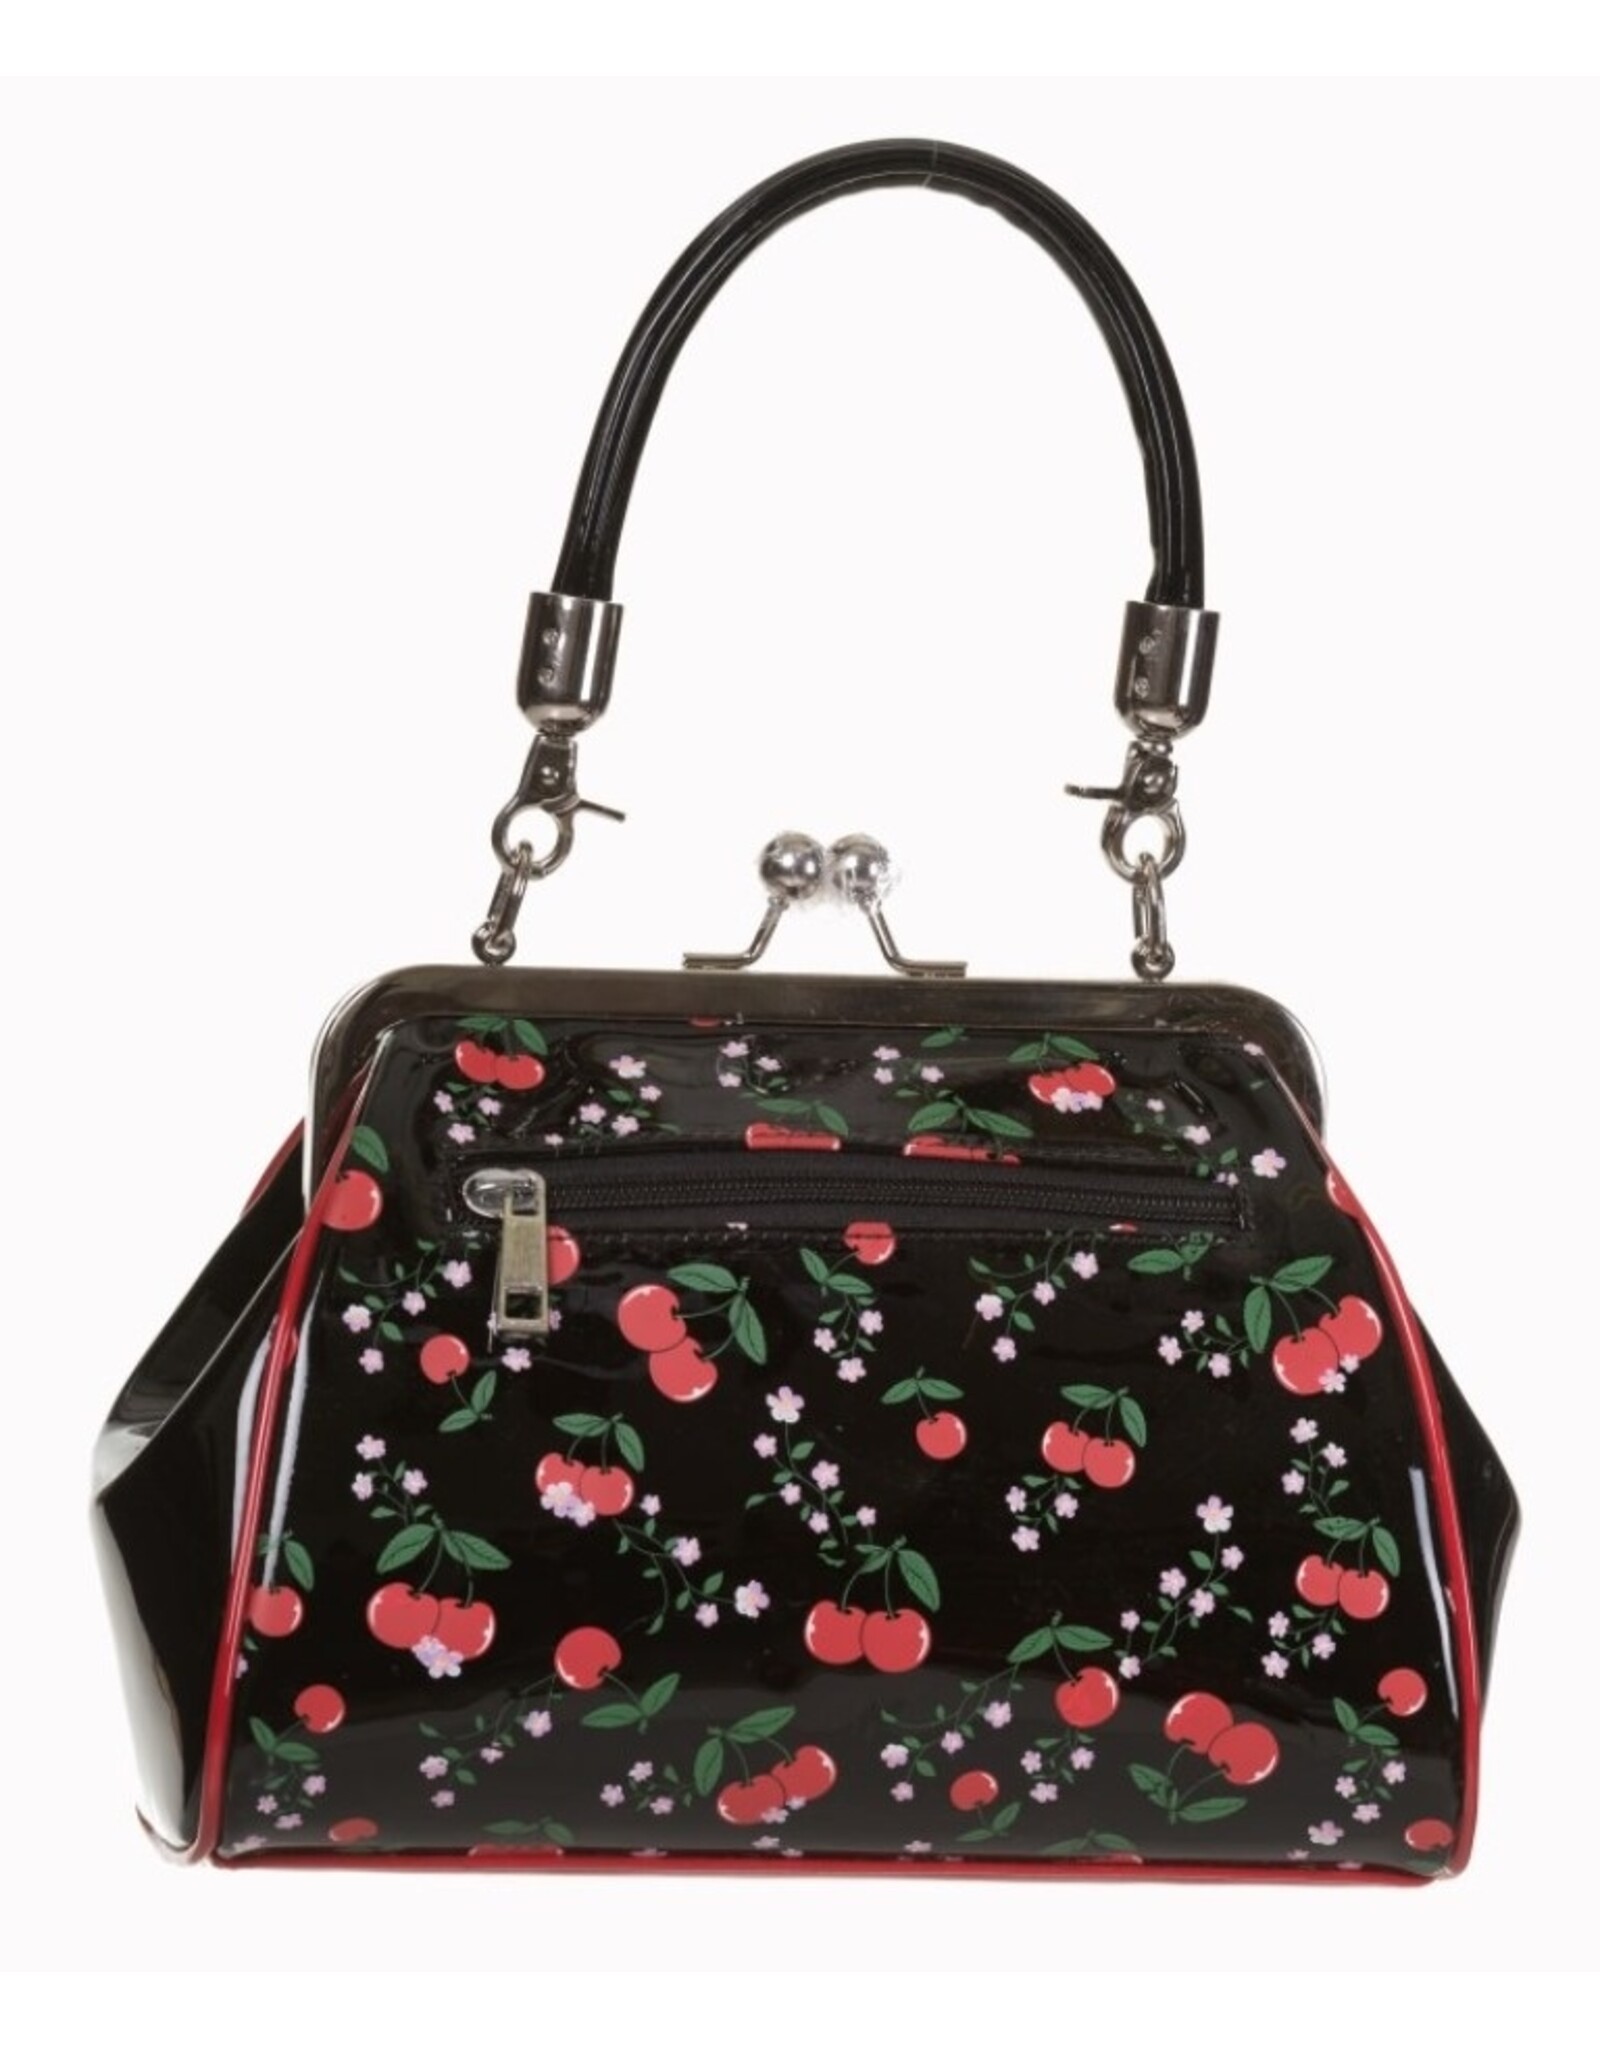 Banned Retro bags  Vintage bags - Banned New Romantics Handbag  with Cherries